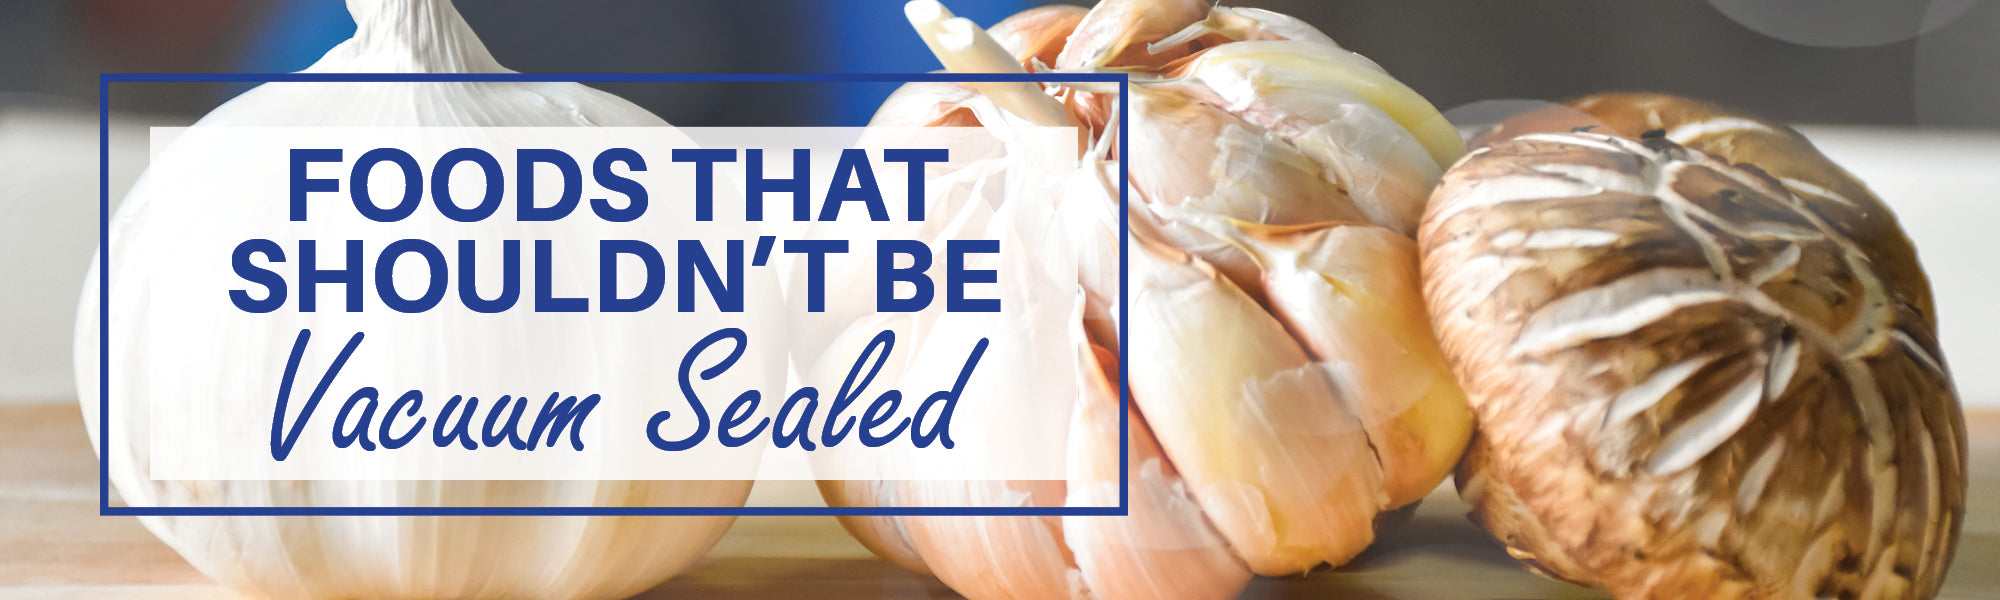 Foods That Should Not Be Vacuum Sealed